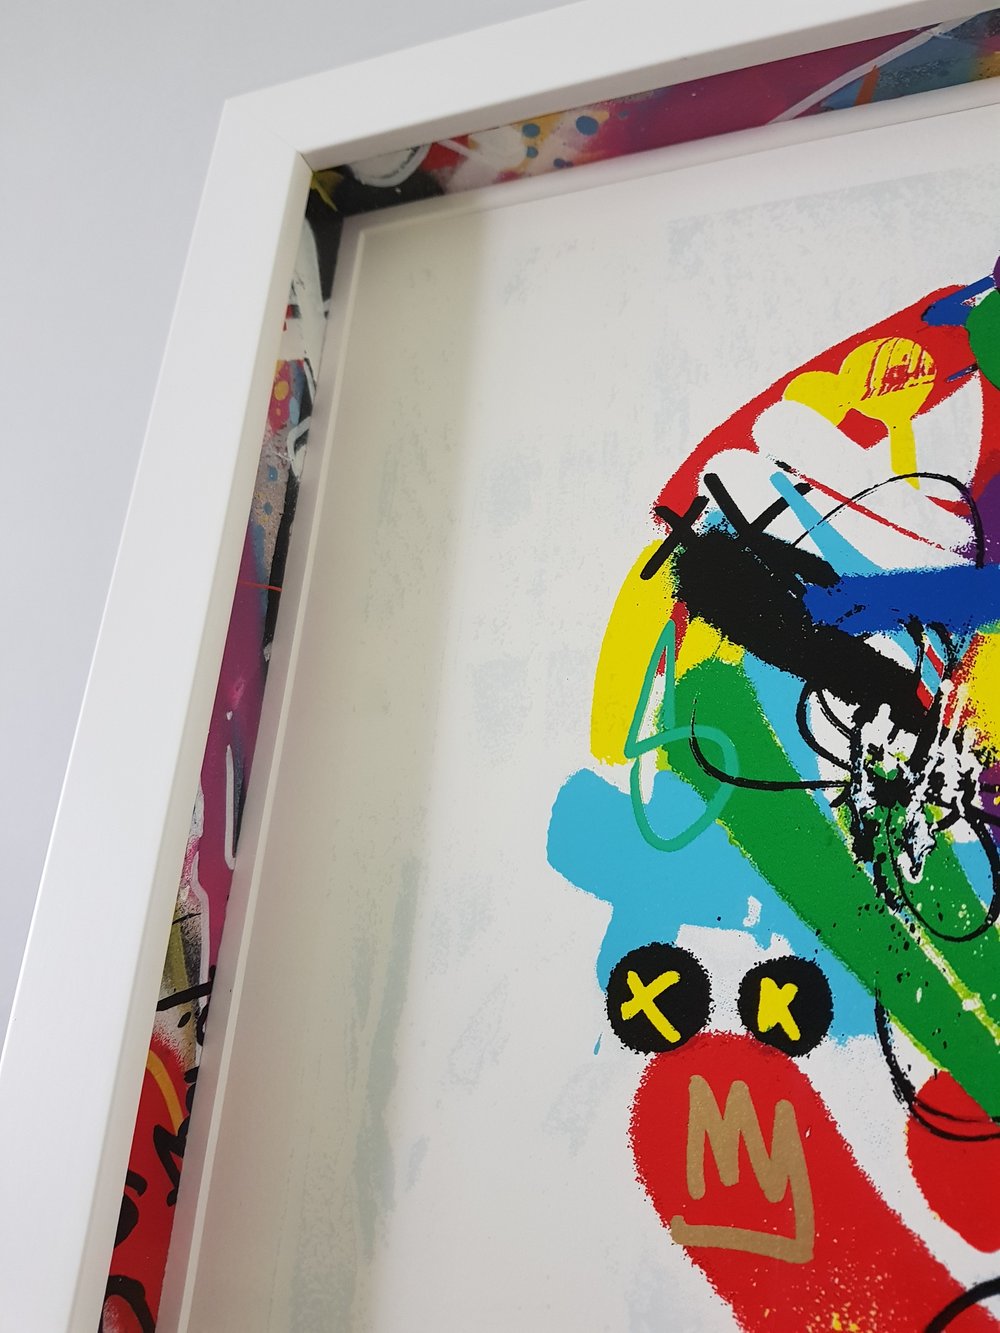 MARTIN WHATSON "PAINT LOVE"- FRAMED WITH CUSTOM SPACERS 24 COLOUR PRINT EDITION OF 150 - 55CM X 55CM